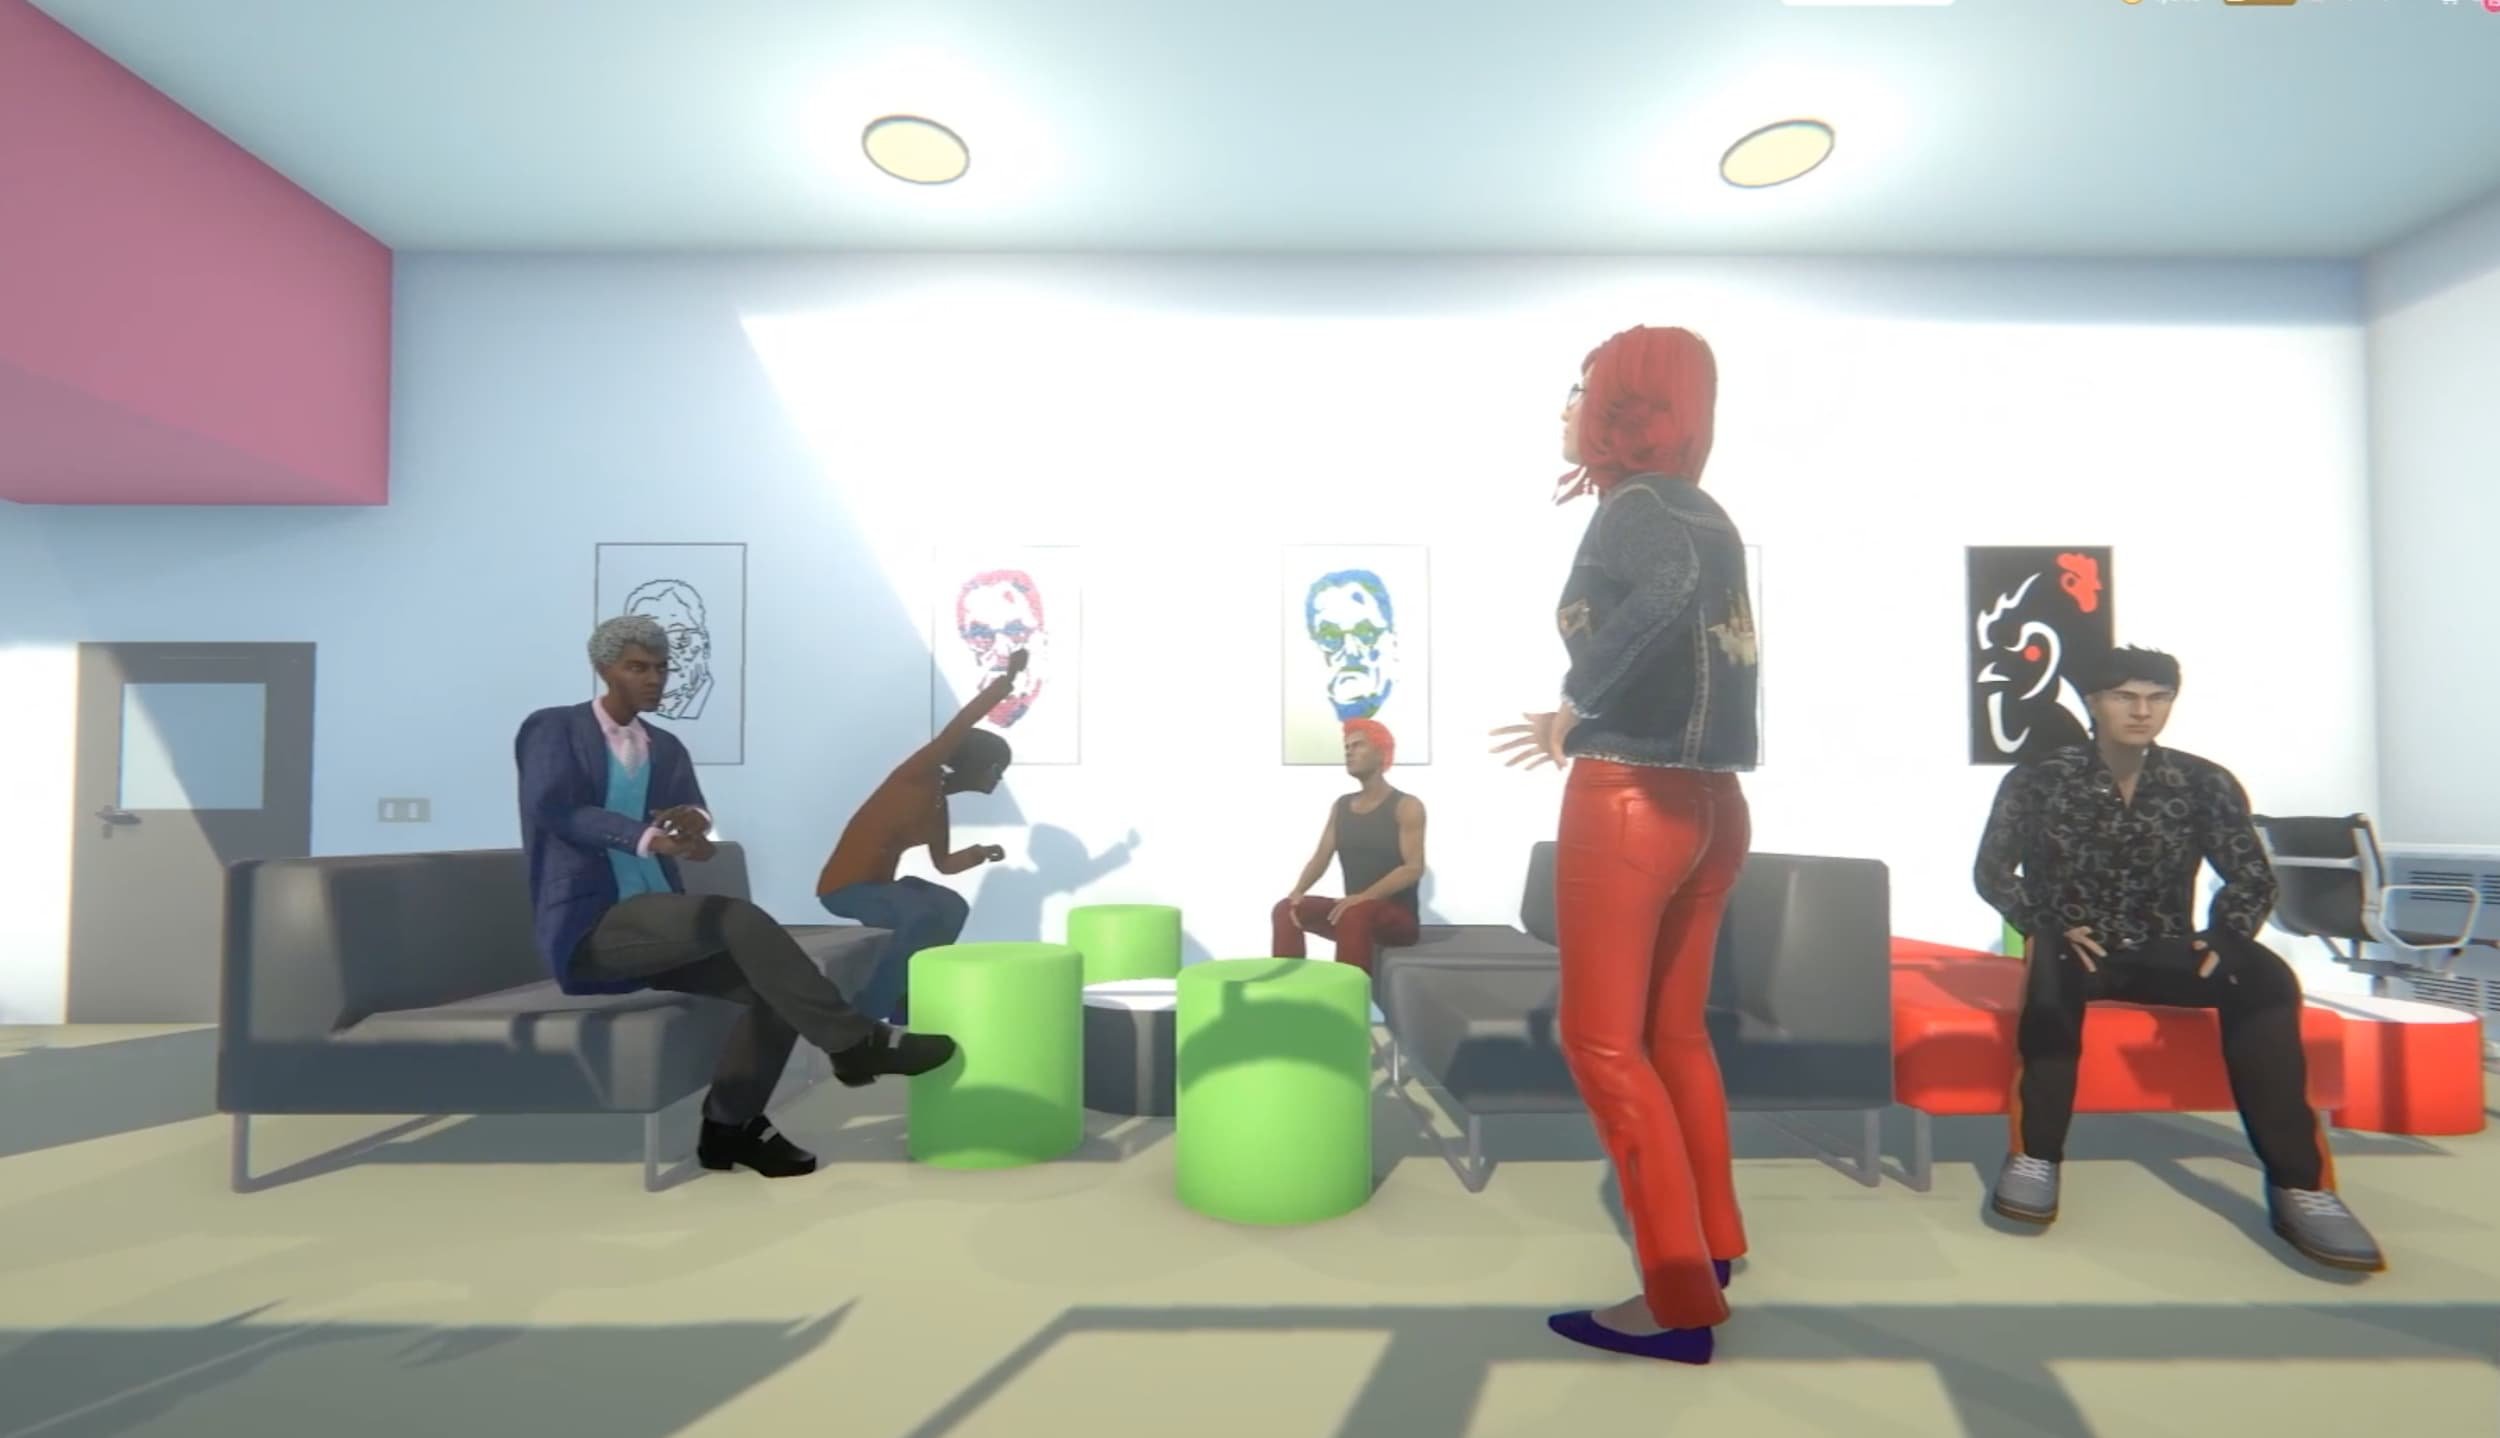 Virtual Worlds And Remote Working — Breakroom Metaverse